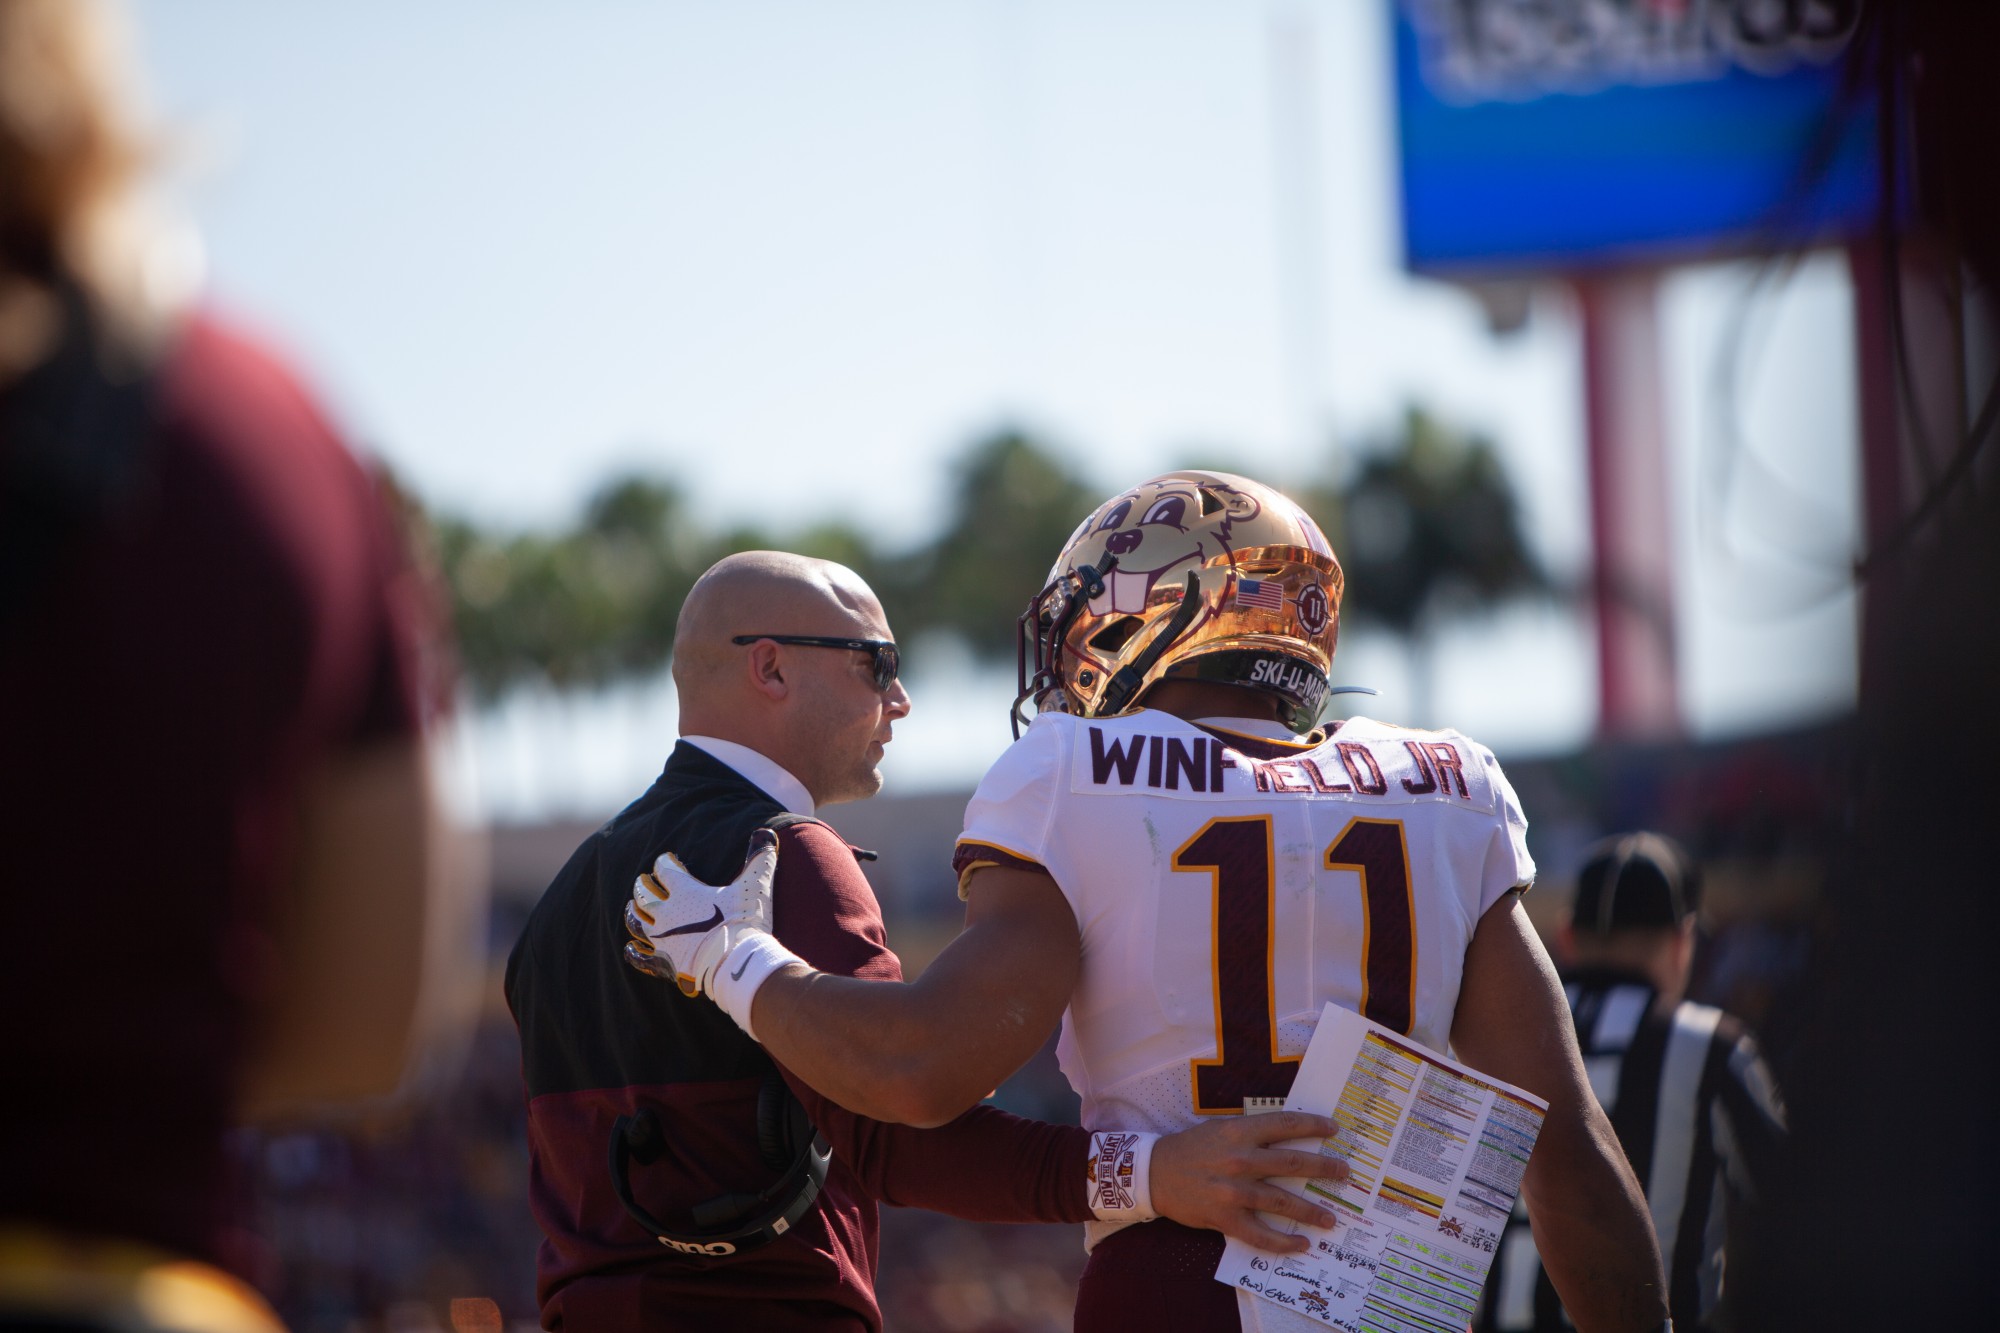 Gophers Head Coach P.J. Fleck converses with Defensive Back Antoine Winfield Jr. at Raymond James Stadium in Tampa, Florida on Wednesday, Jan. 1. Minnesota holds a 24-17 lead over Auburn heading into the third quarter of the Outback Bowl. (Kamaan Richards / Minnesota Daily)